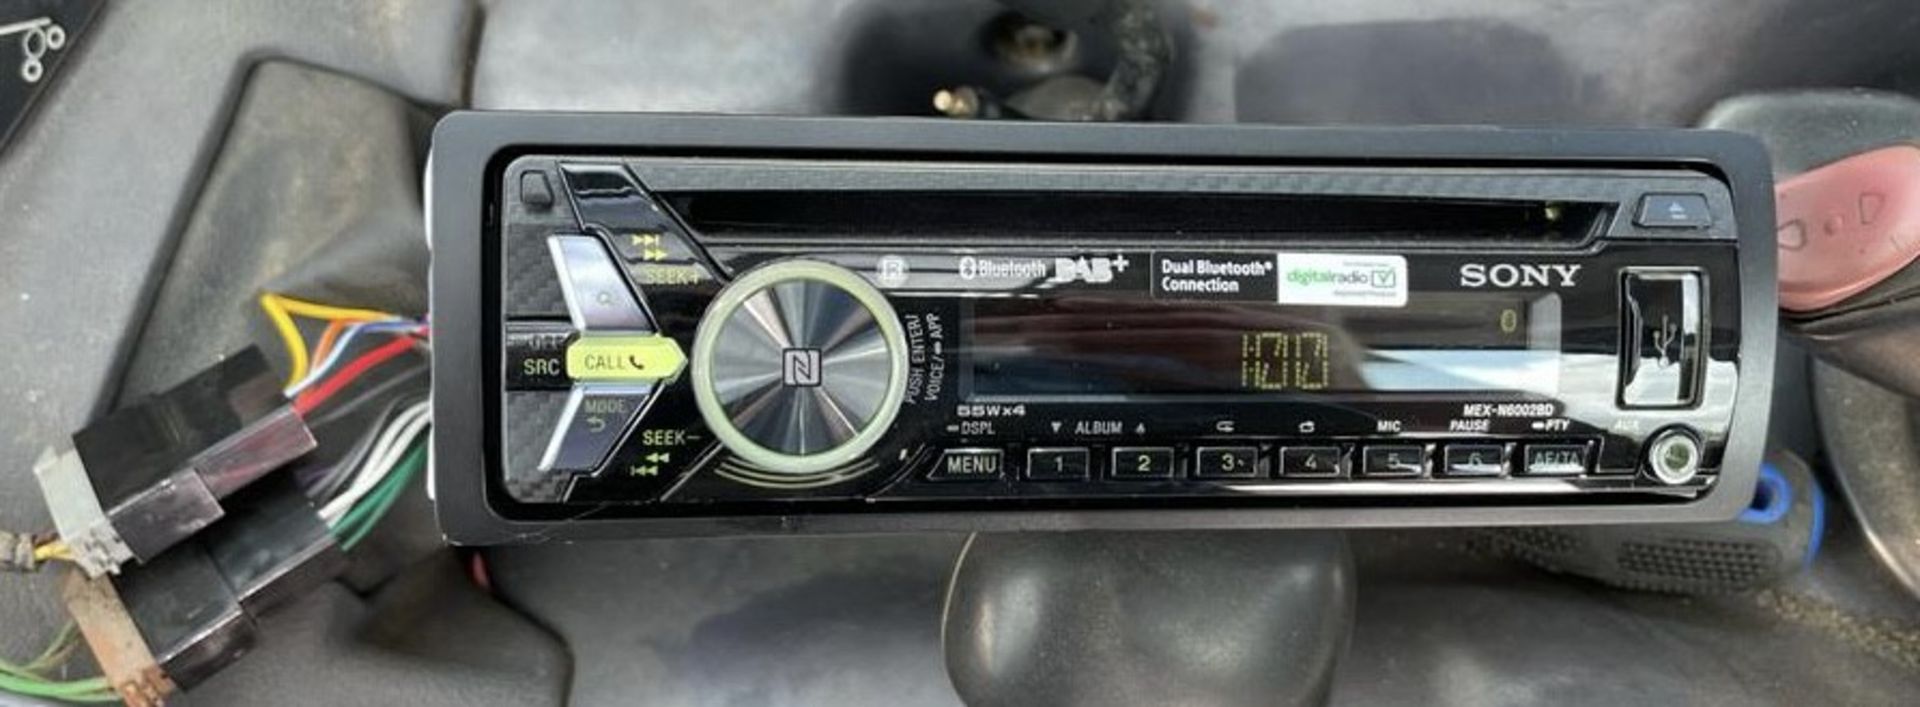 Sony Vehicle CD Player - Image 4 of 5